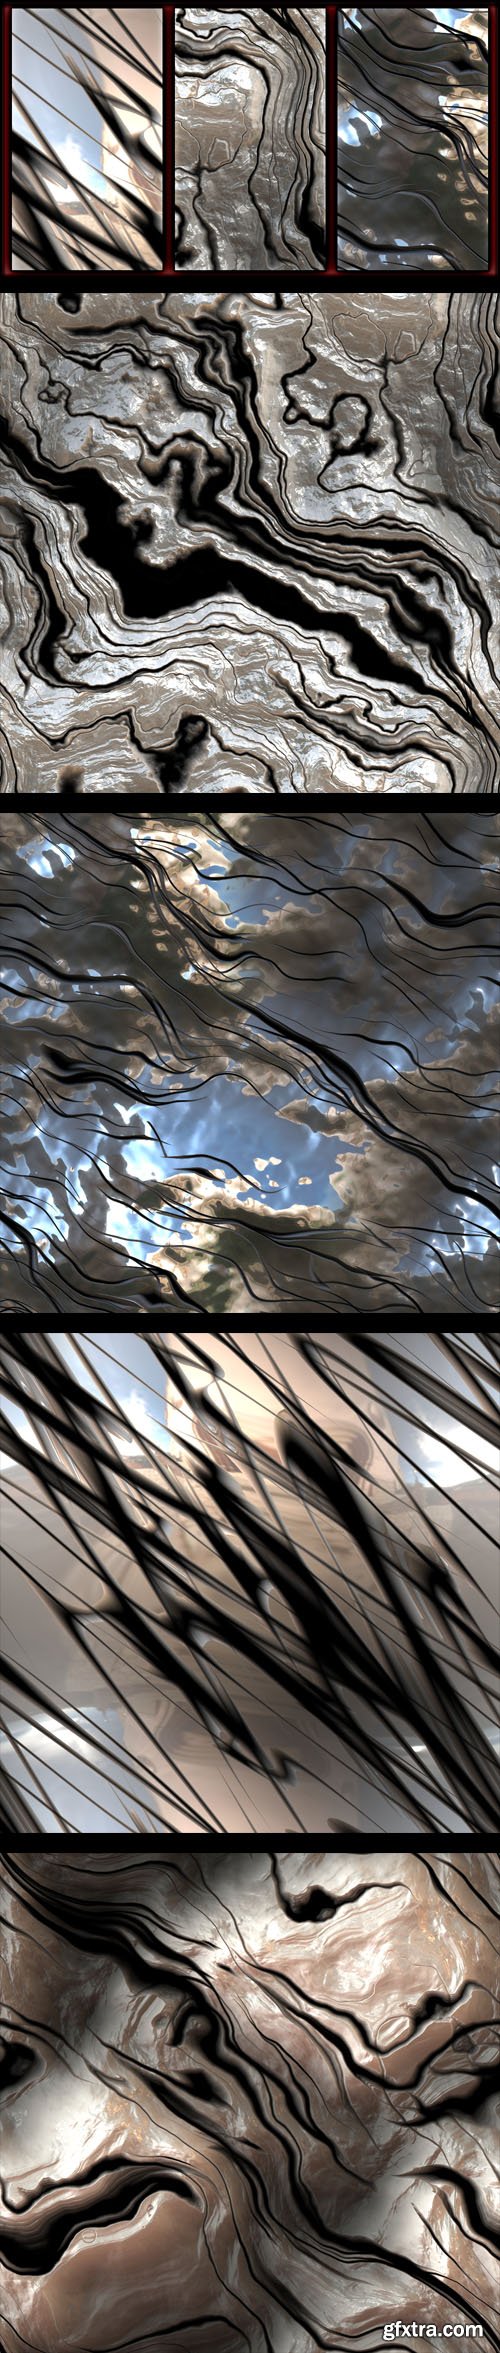 Seamless Reflective Abstract Malleable Metal - Photoshop Patterns + Textures